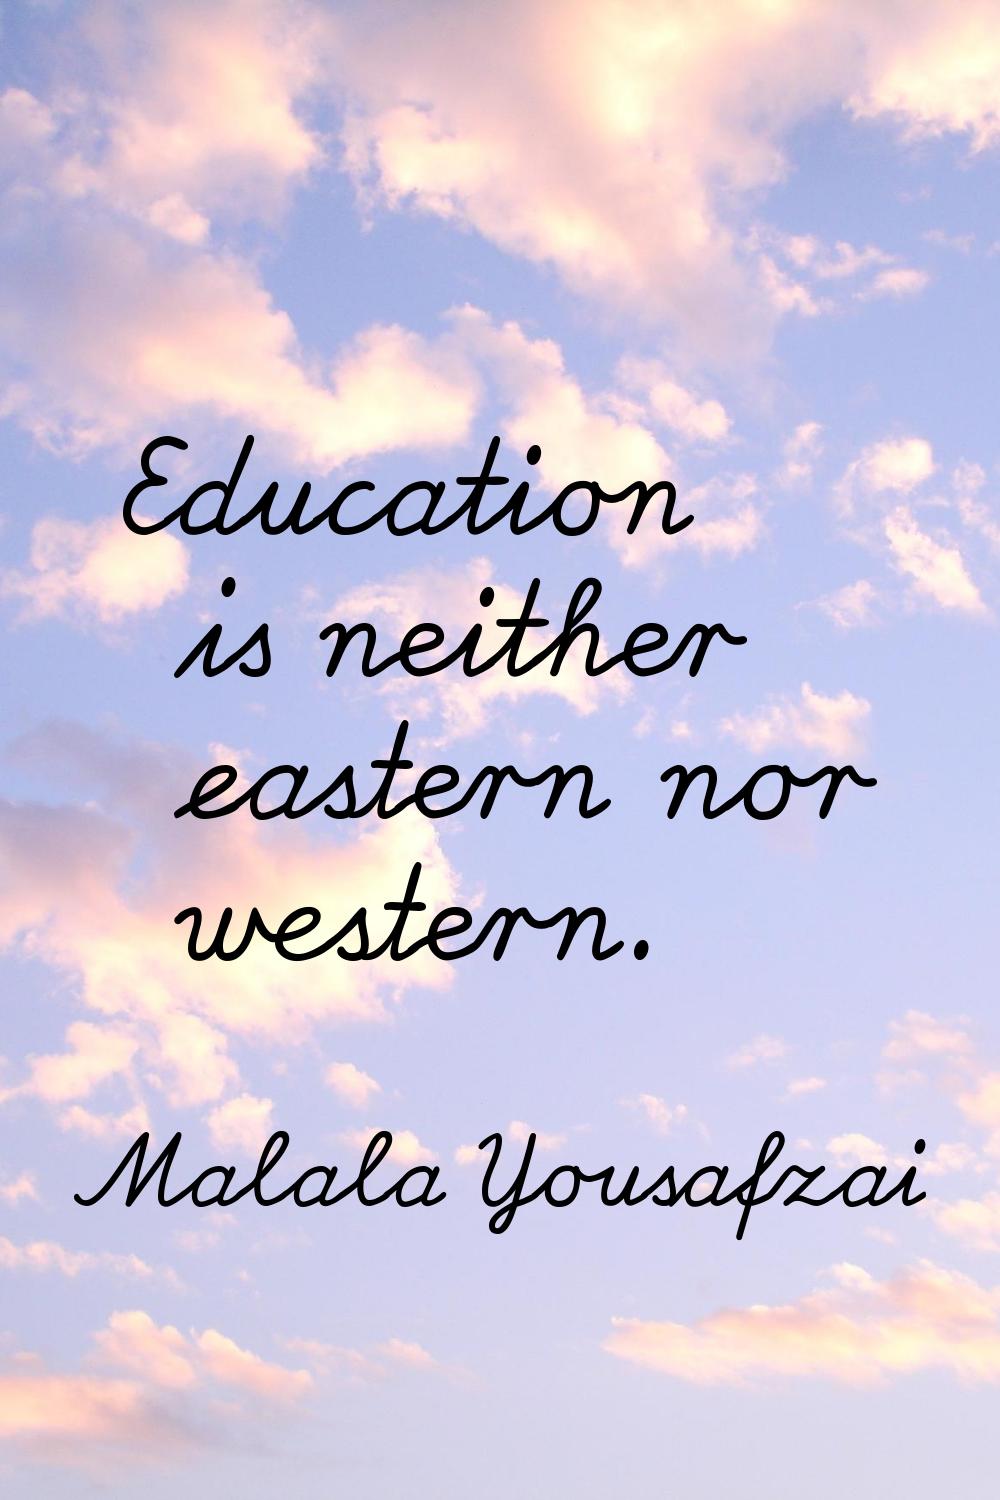 Education is neither eastern nor western.